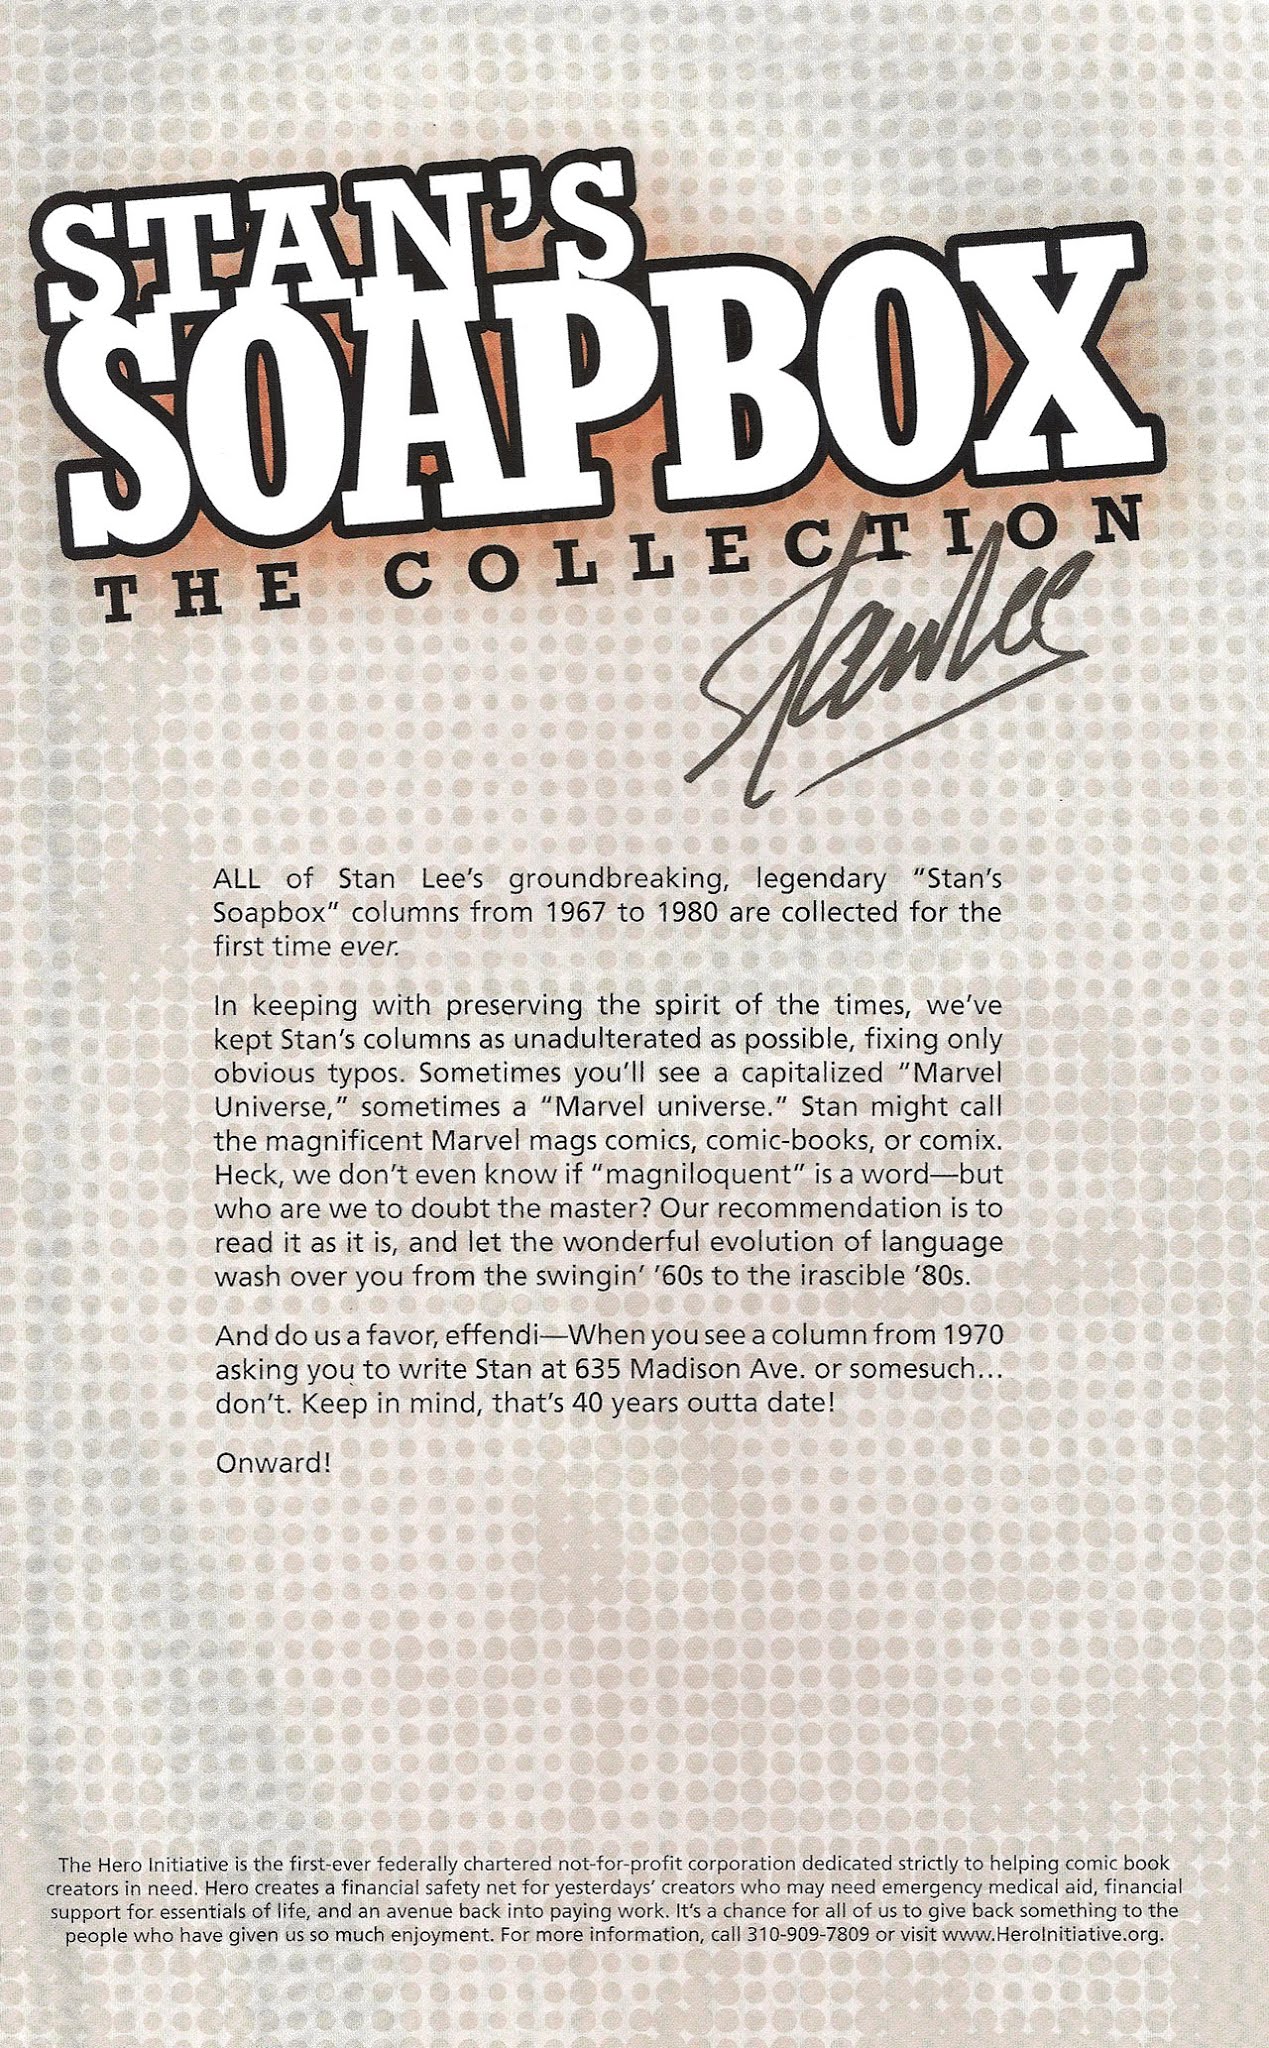 Read online Stan's Soapbox: The Collection comic -  Issue # TPB - 3